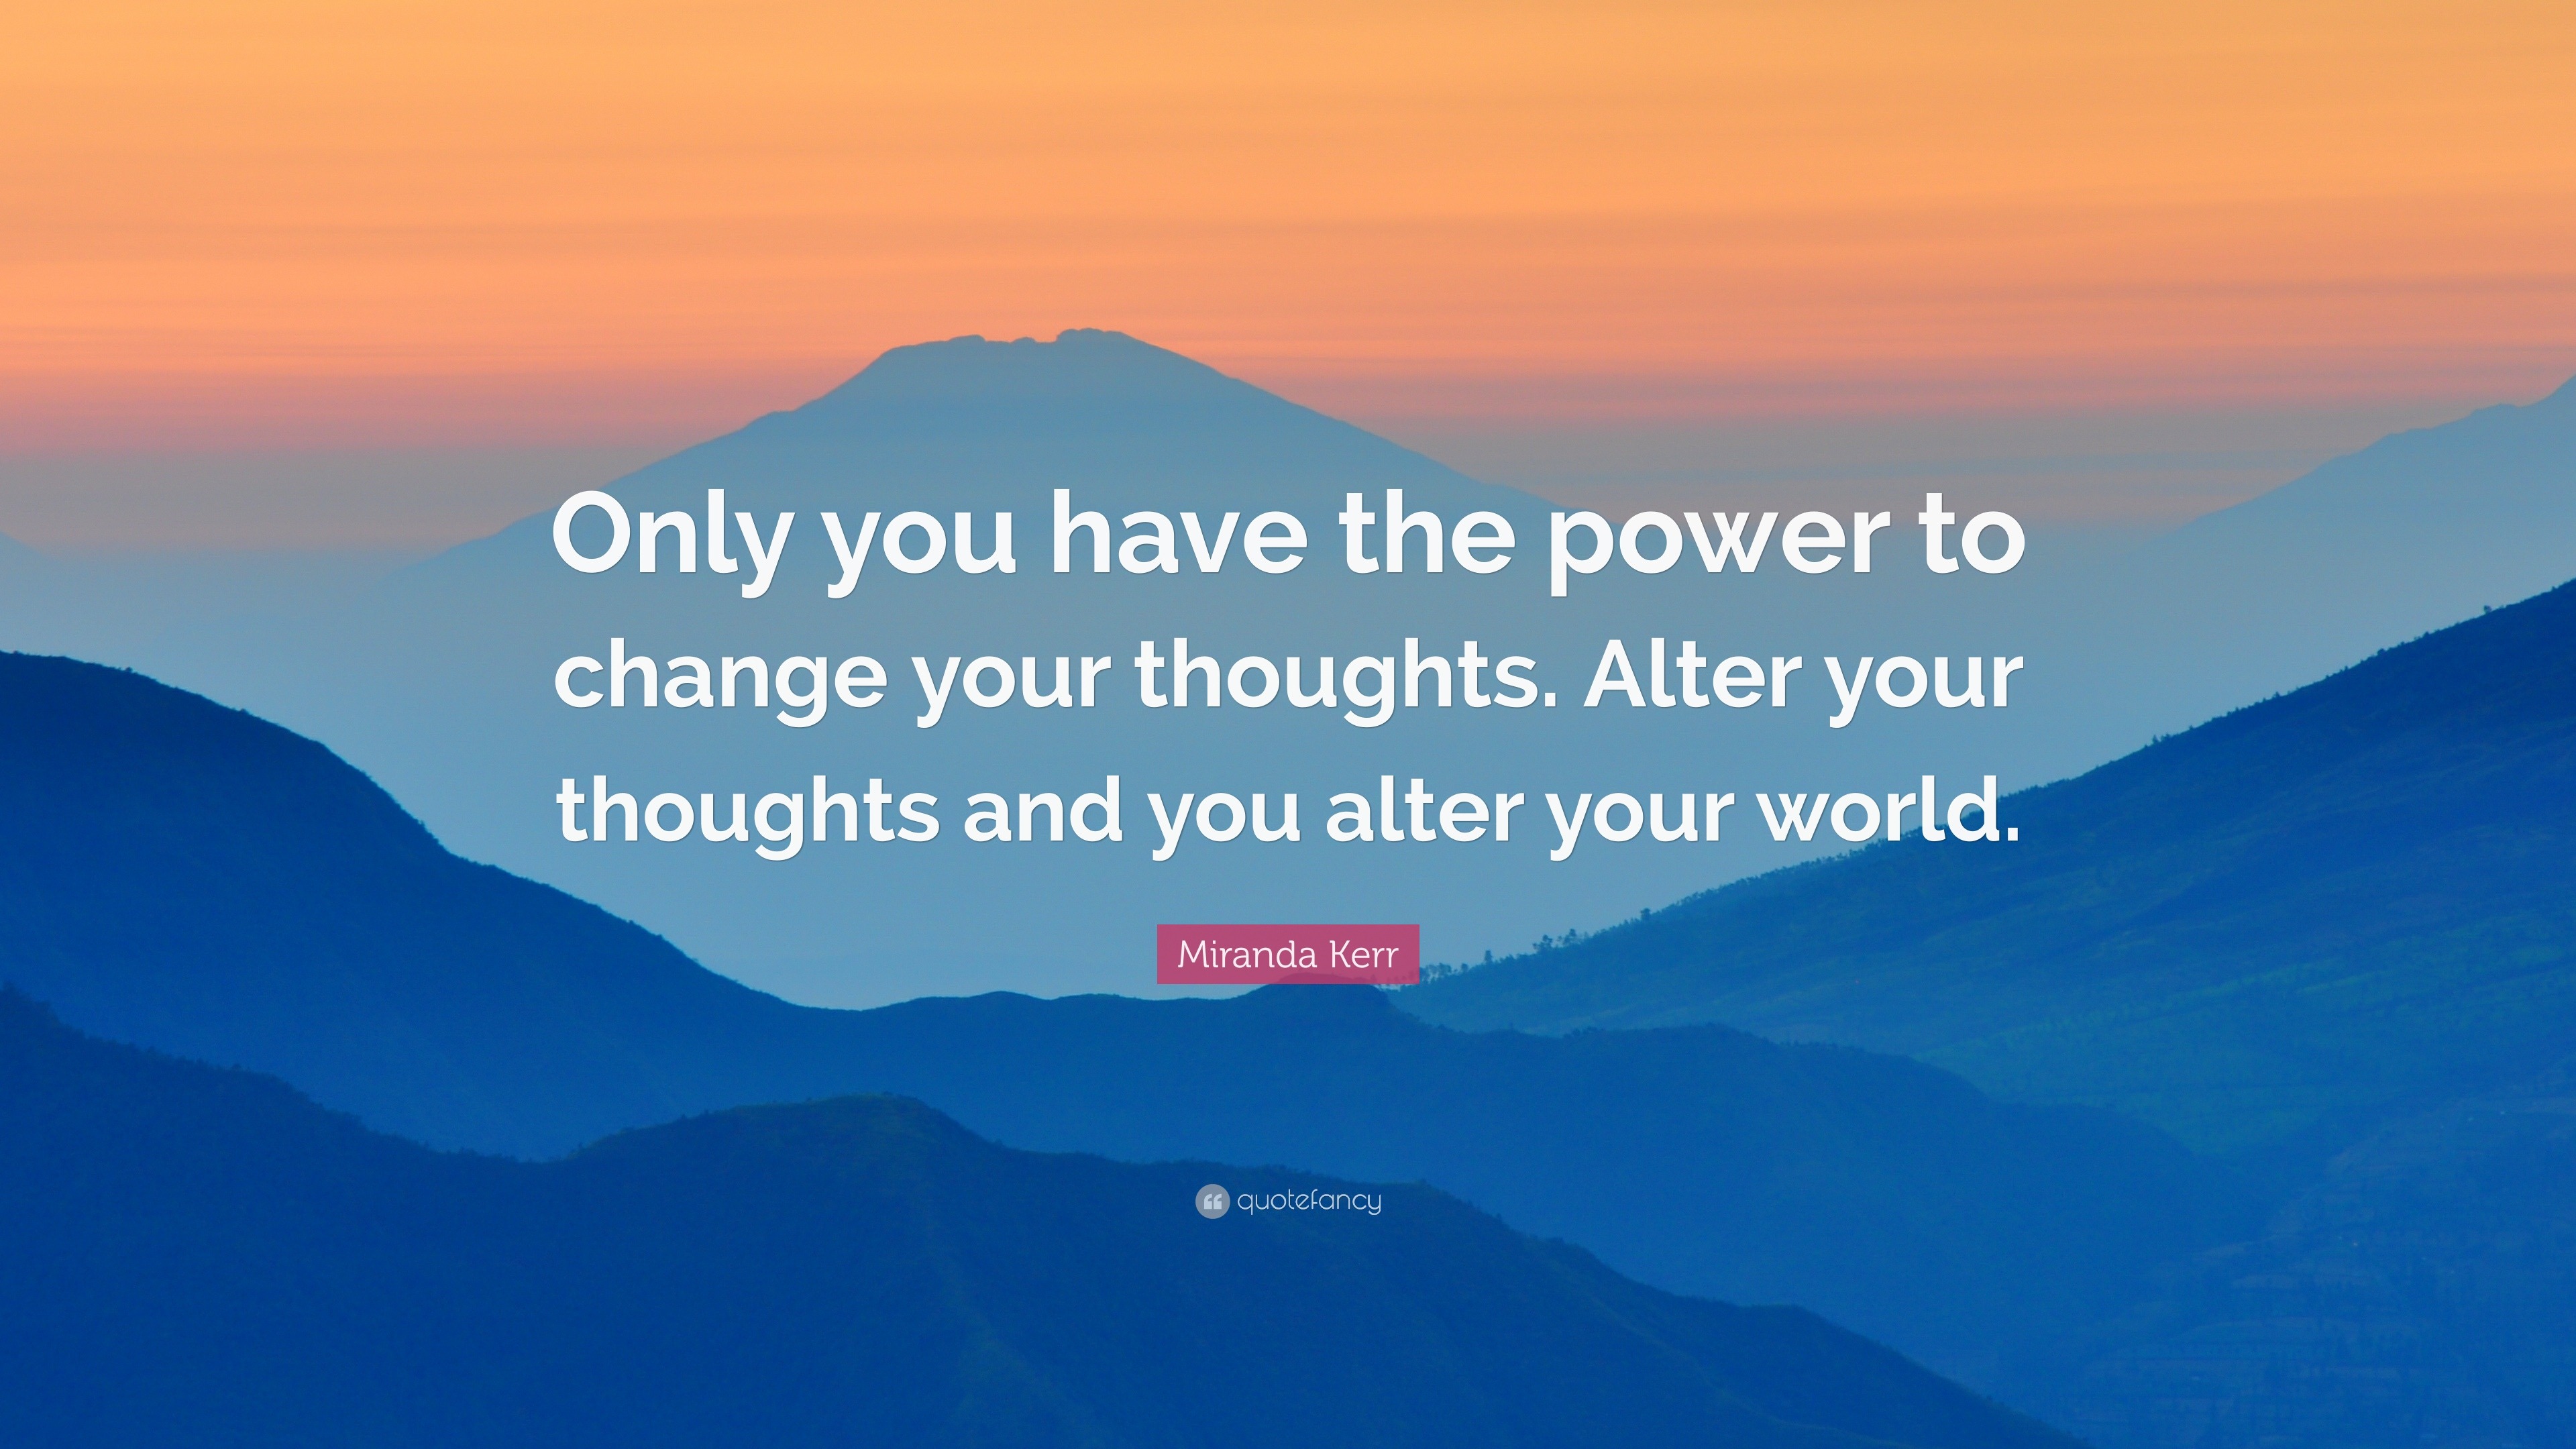 Miranda Kerr Quote: “Only you have the power to change your thoughts ...